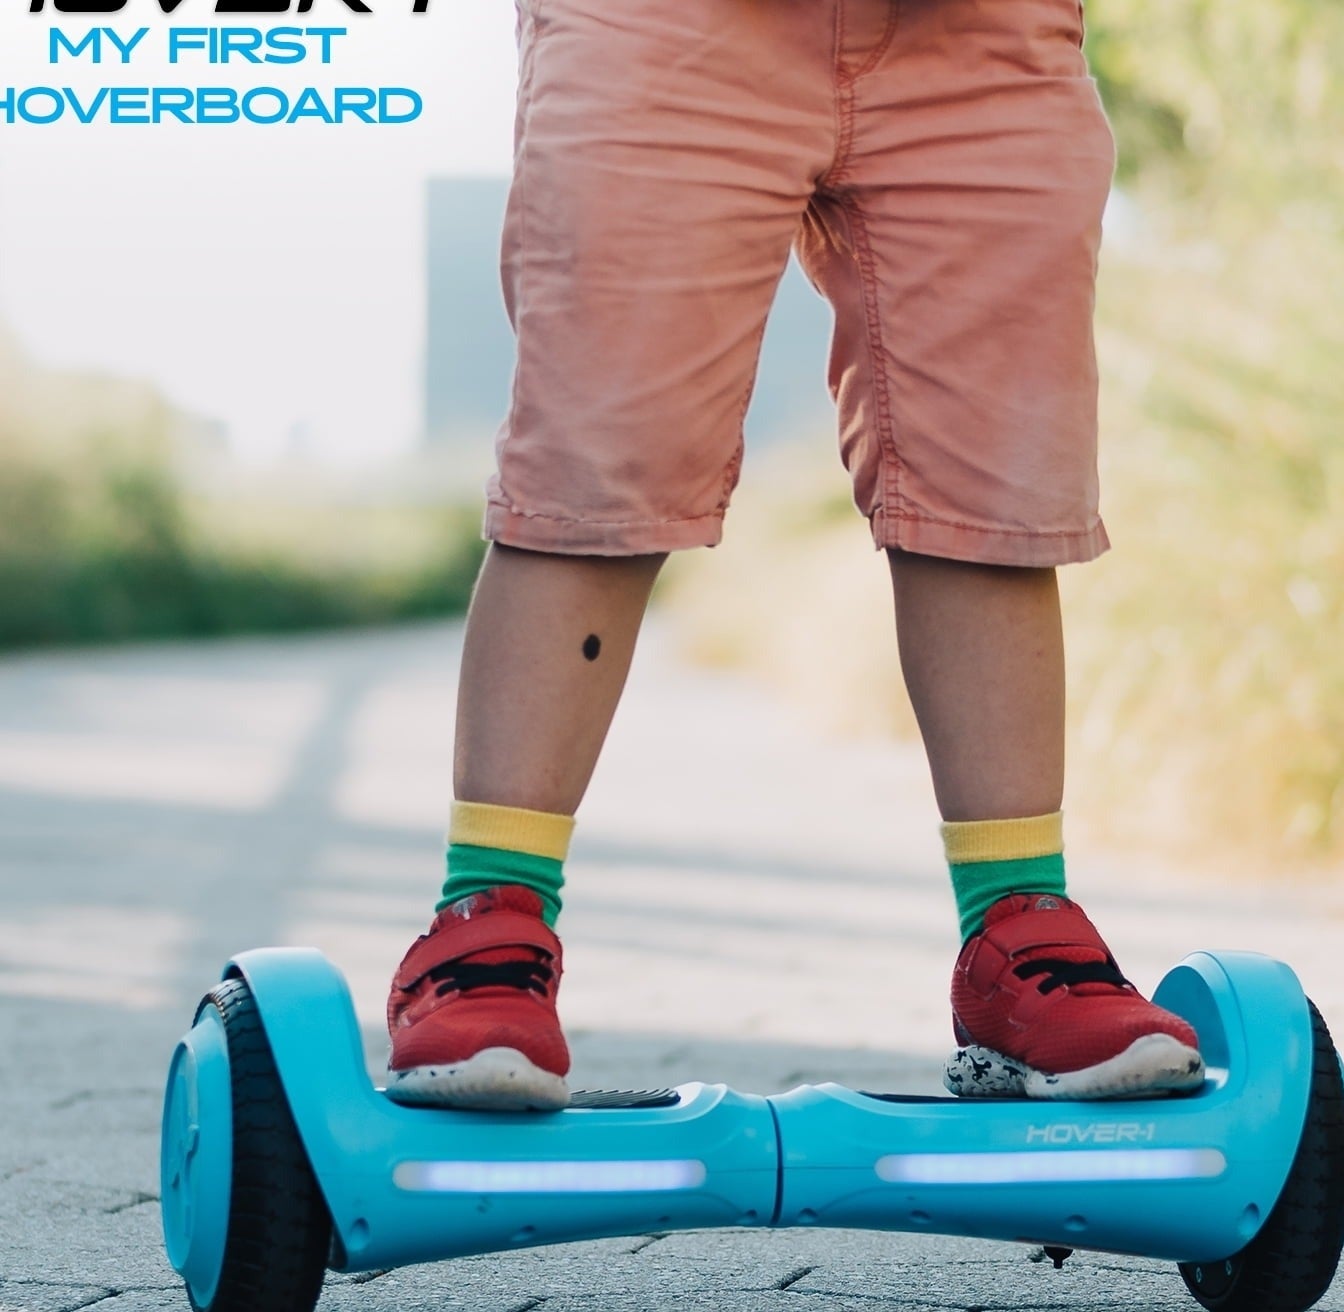 Child rides on a hoverboard